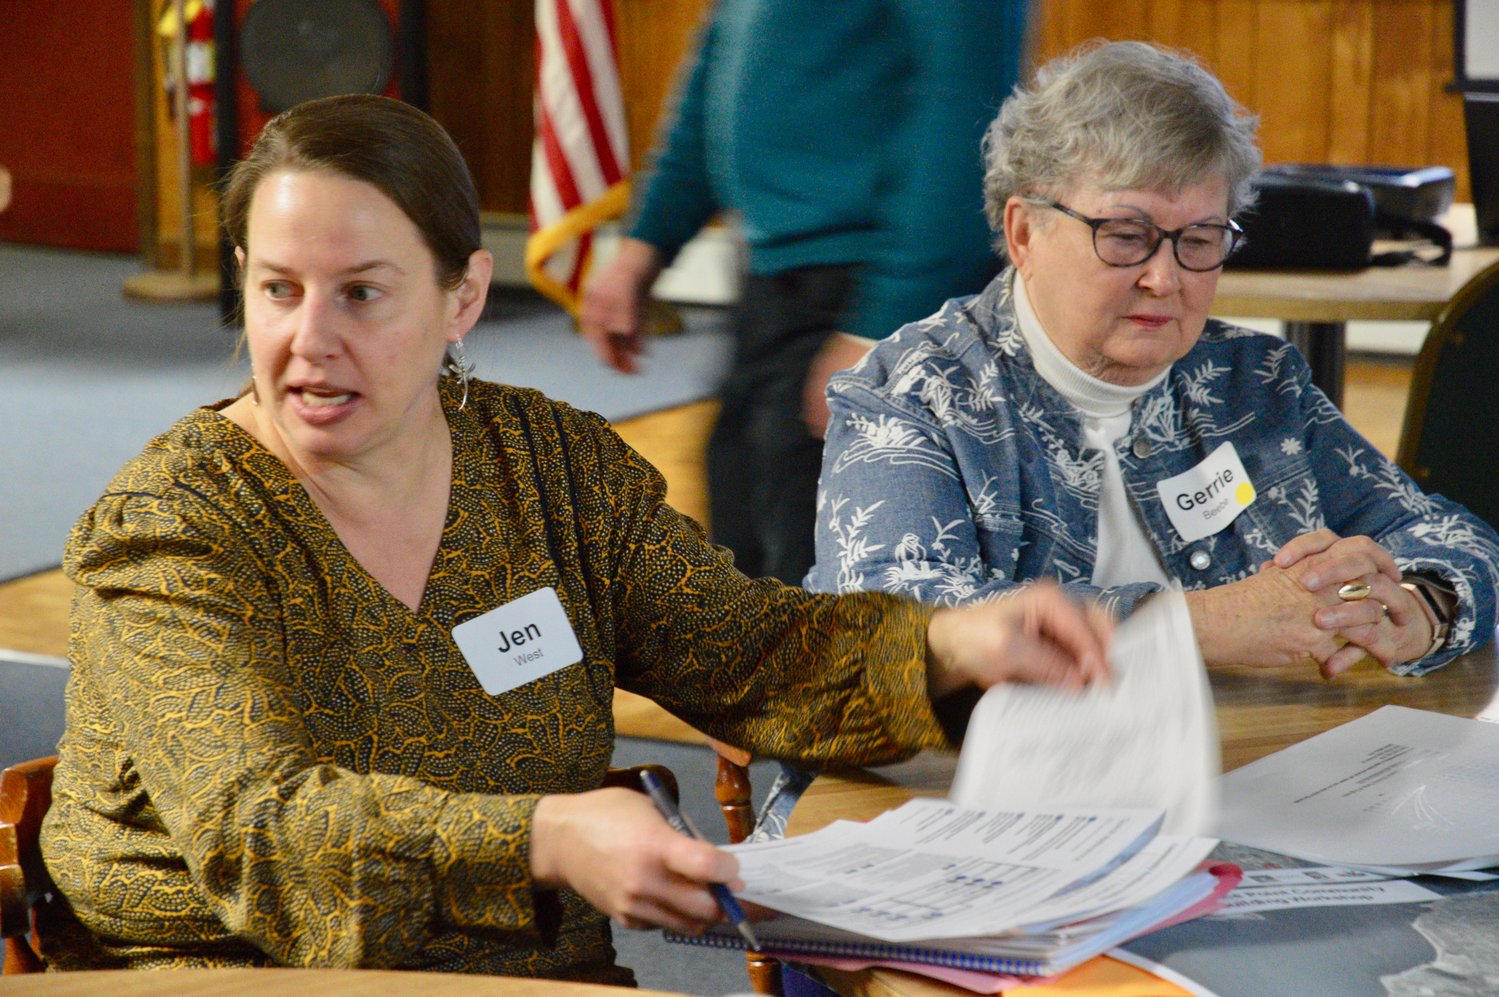 Jen West (left) discusses coastal resiliency issues with Common Fence Point resident Gerrie Beebe and other members of the “Yellow Group” during the workshop at the VFW Hall on Anthony Road.